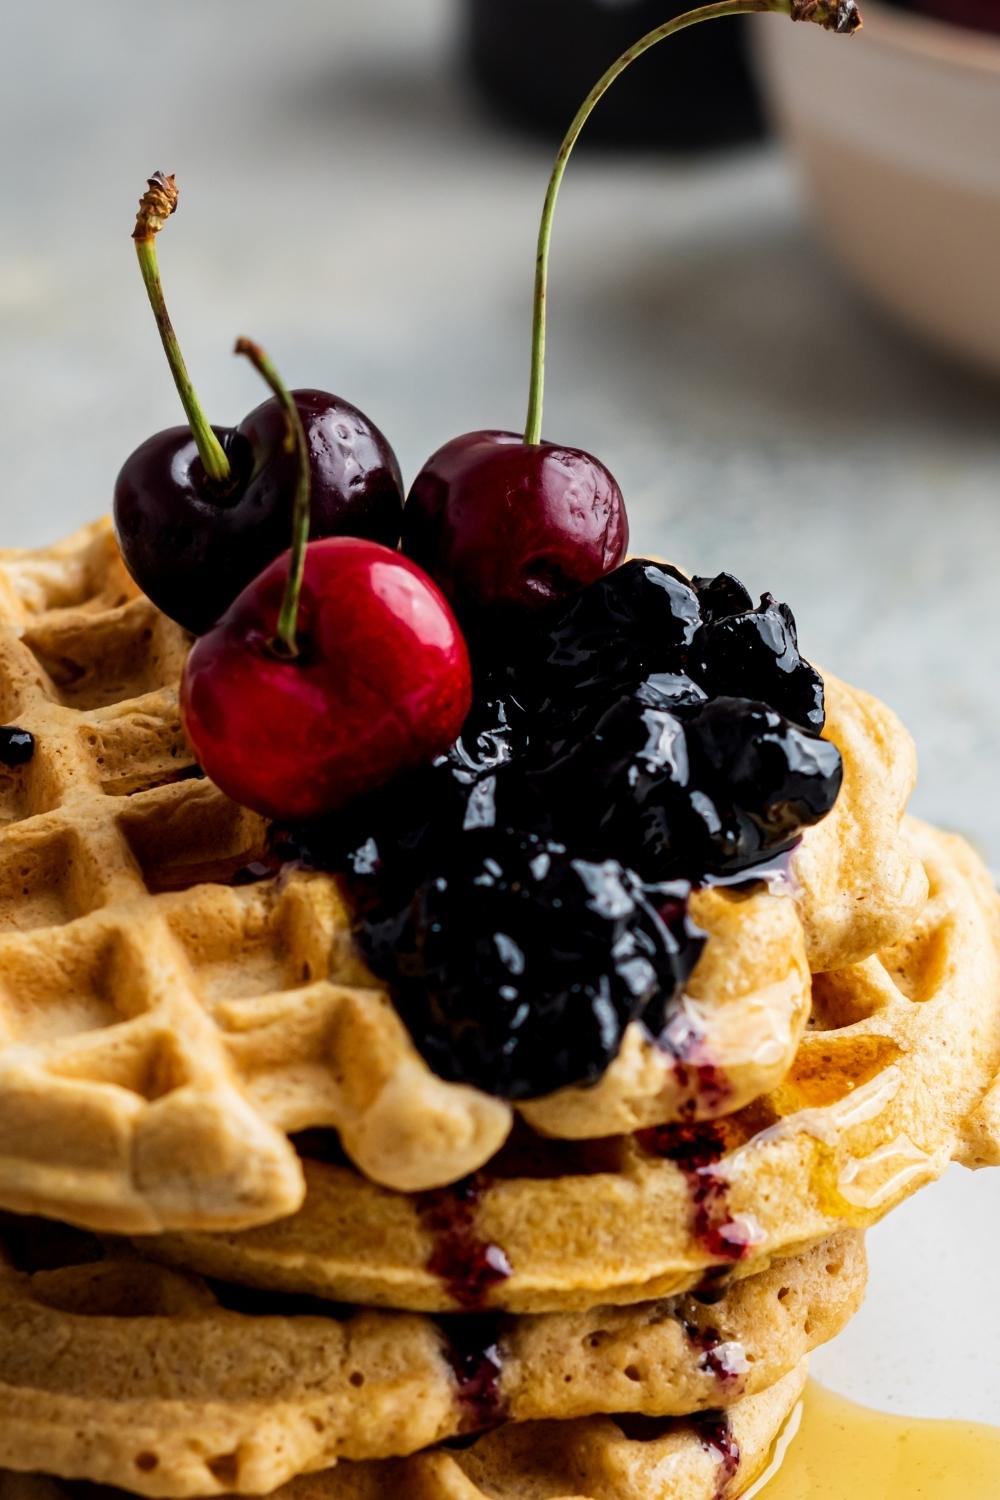 a close up the berries and cherries on top of homemade waffles without milk.